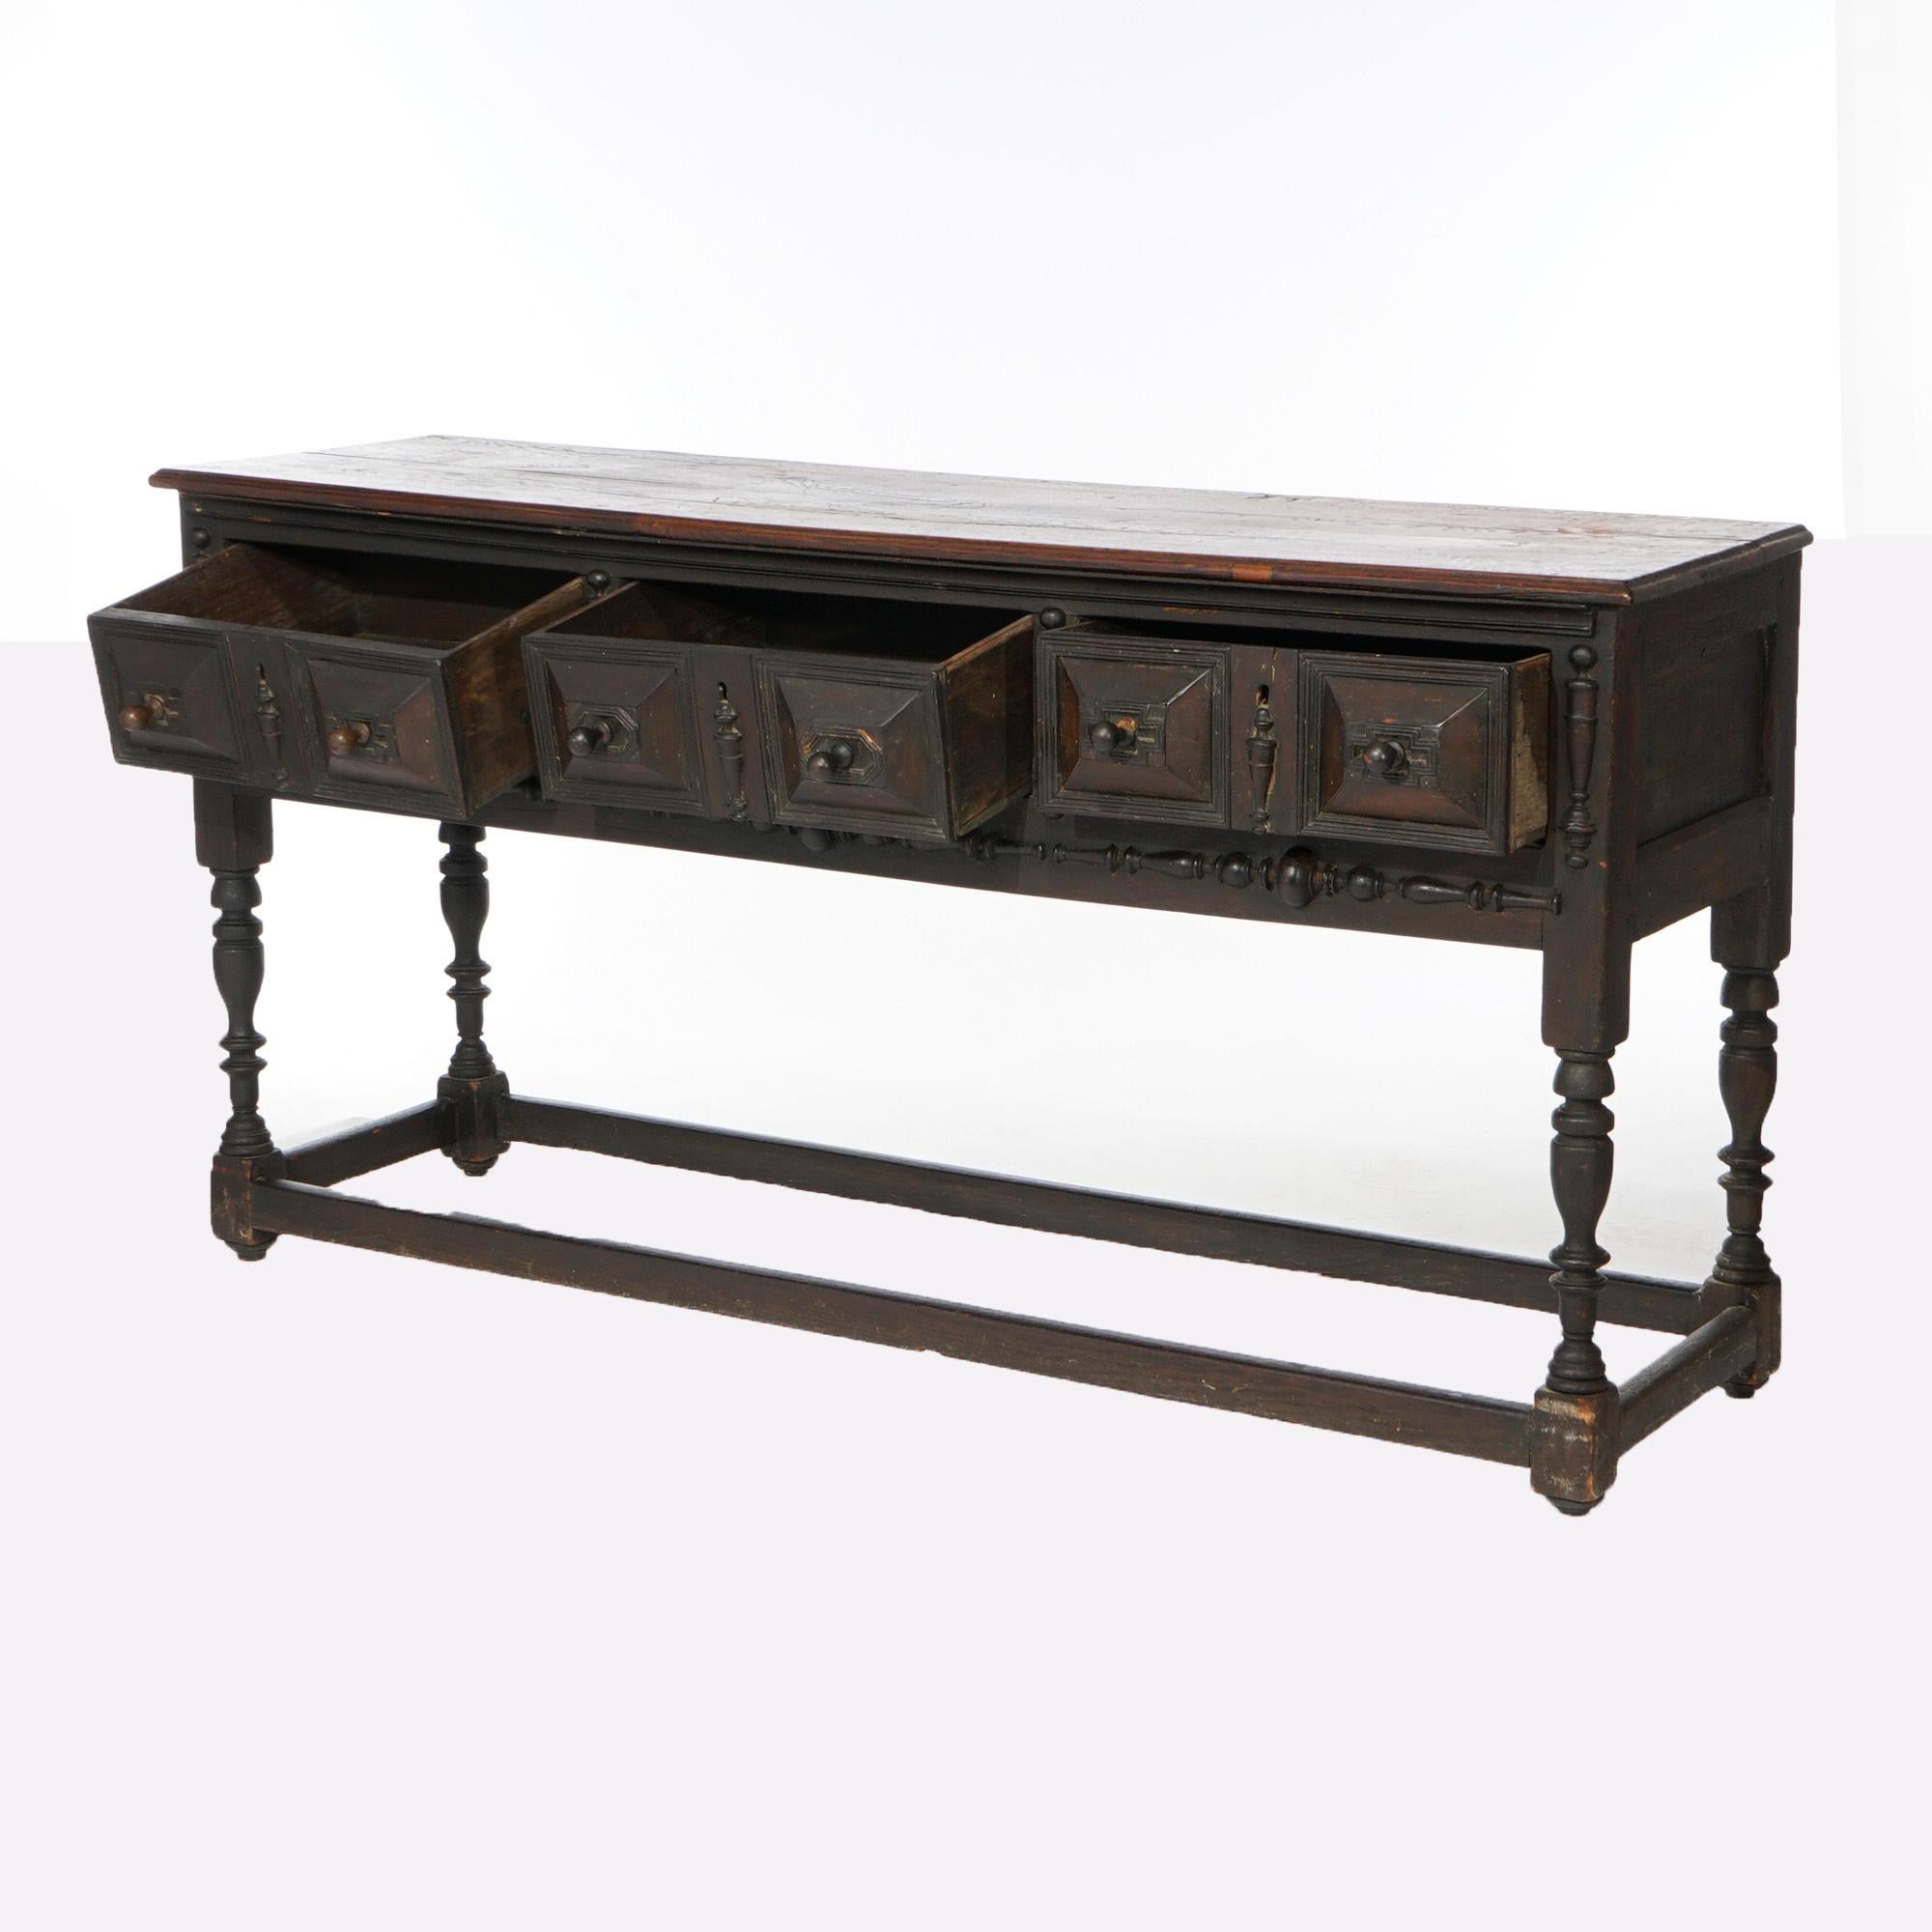 An antique Jacobean sideboard offers English oak construction with three drawers with carved pyramidal elements, raised balustrade legs and stretcher base, 18th century

Measures- 32.5''H x 62.25''W x 19.5''D